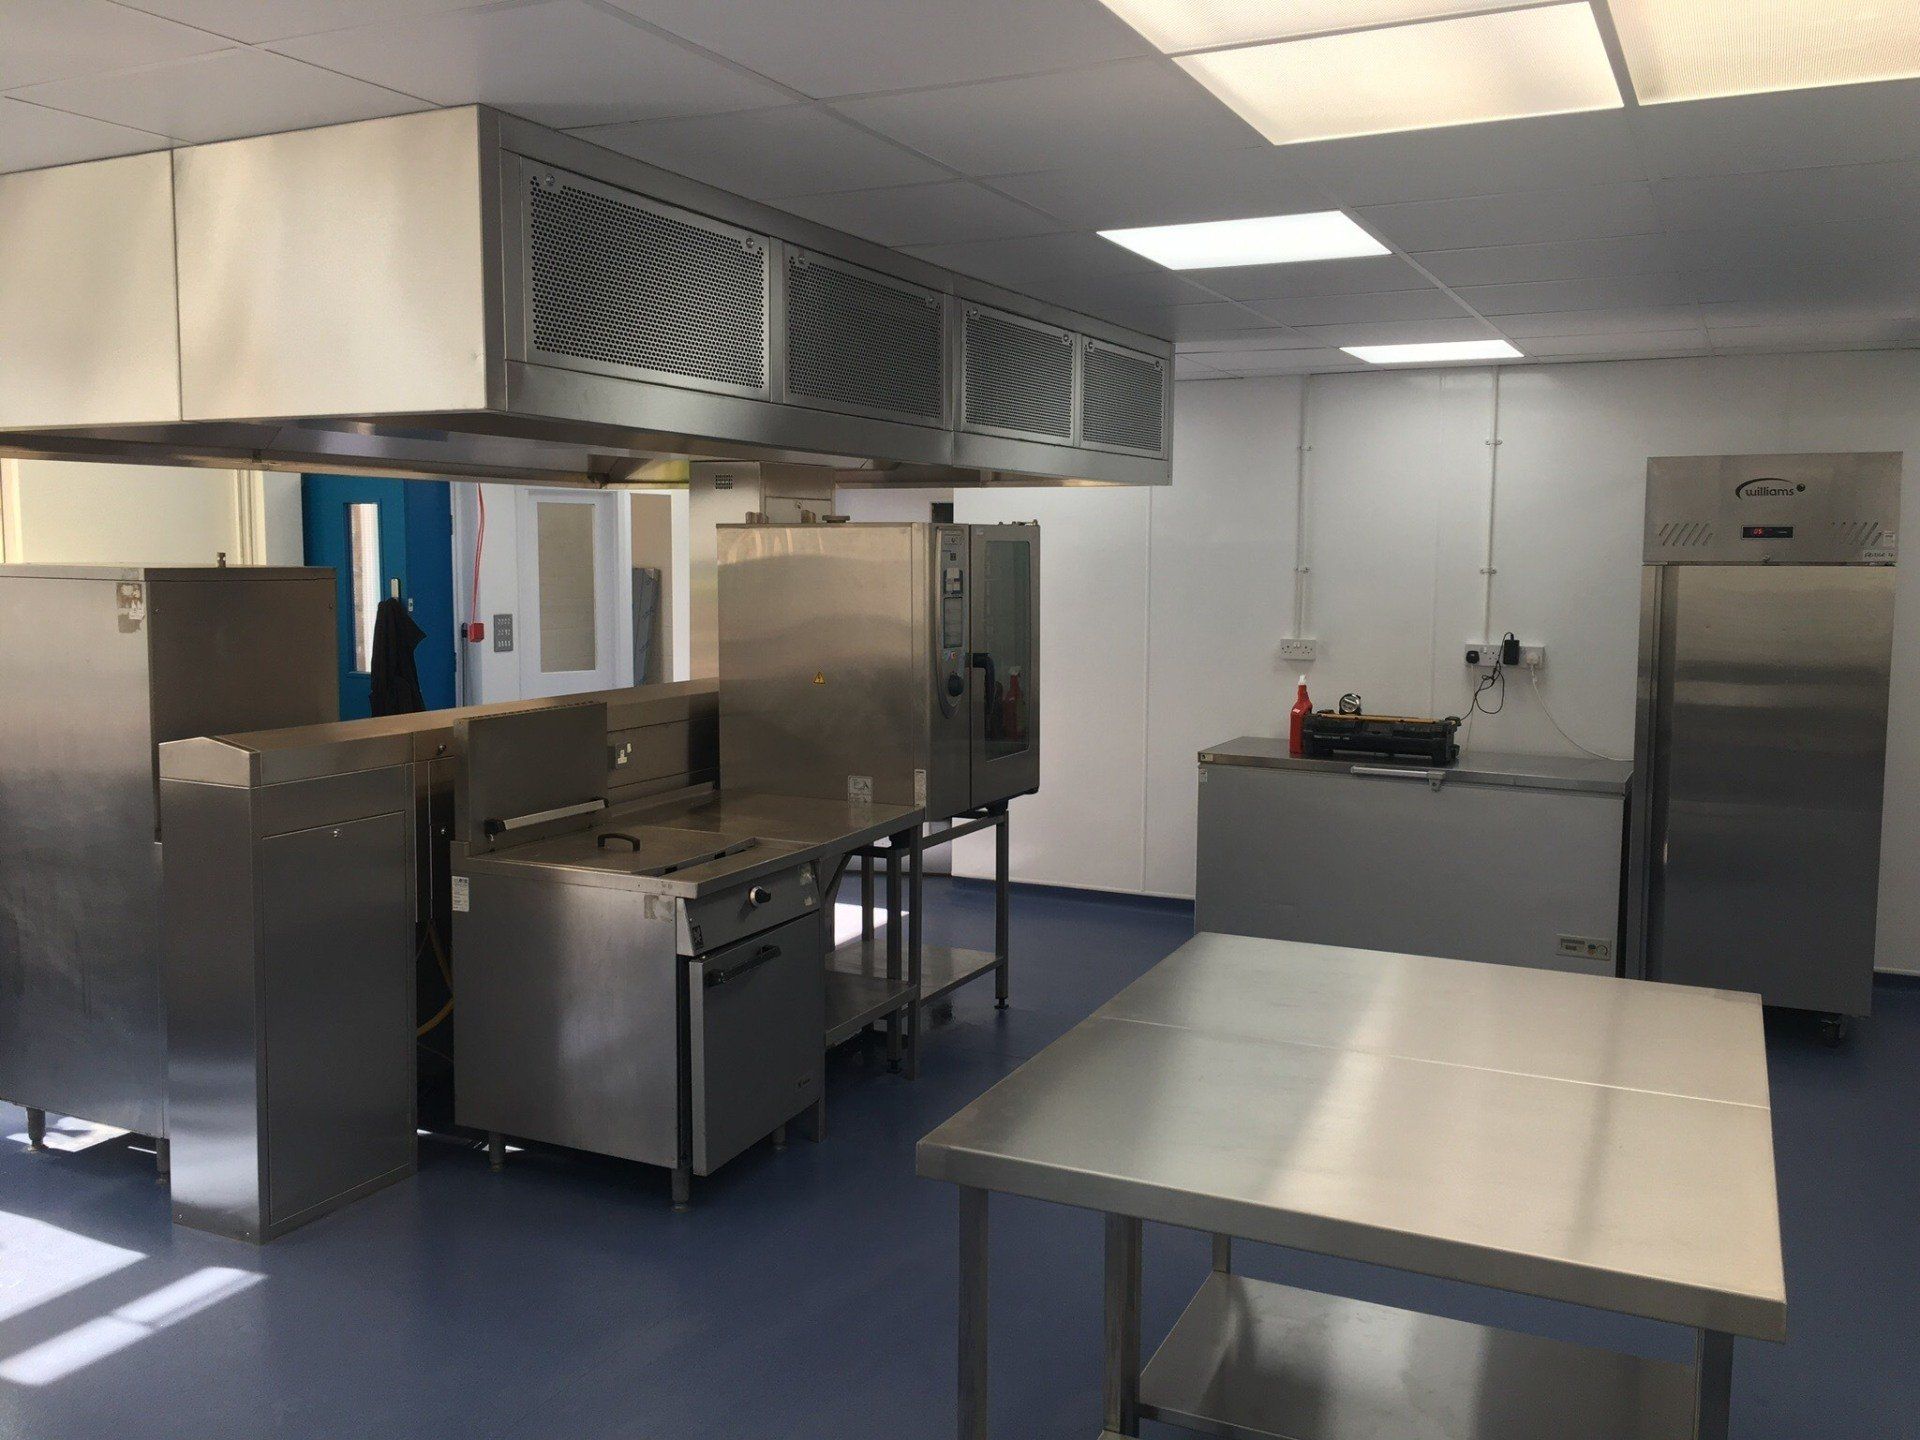 the kitchen at st andrew's primary school in hull